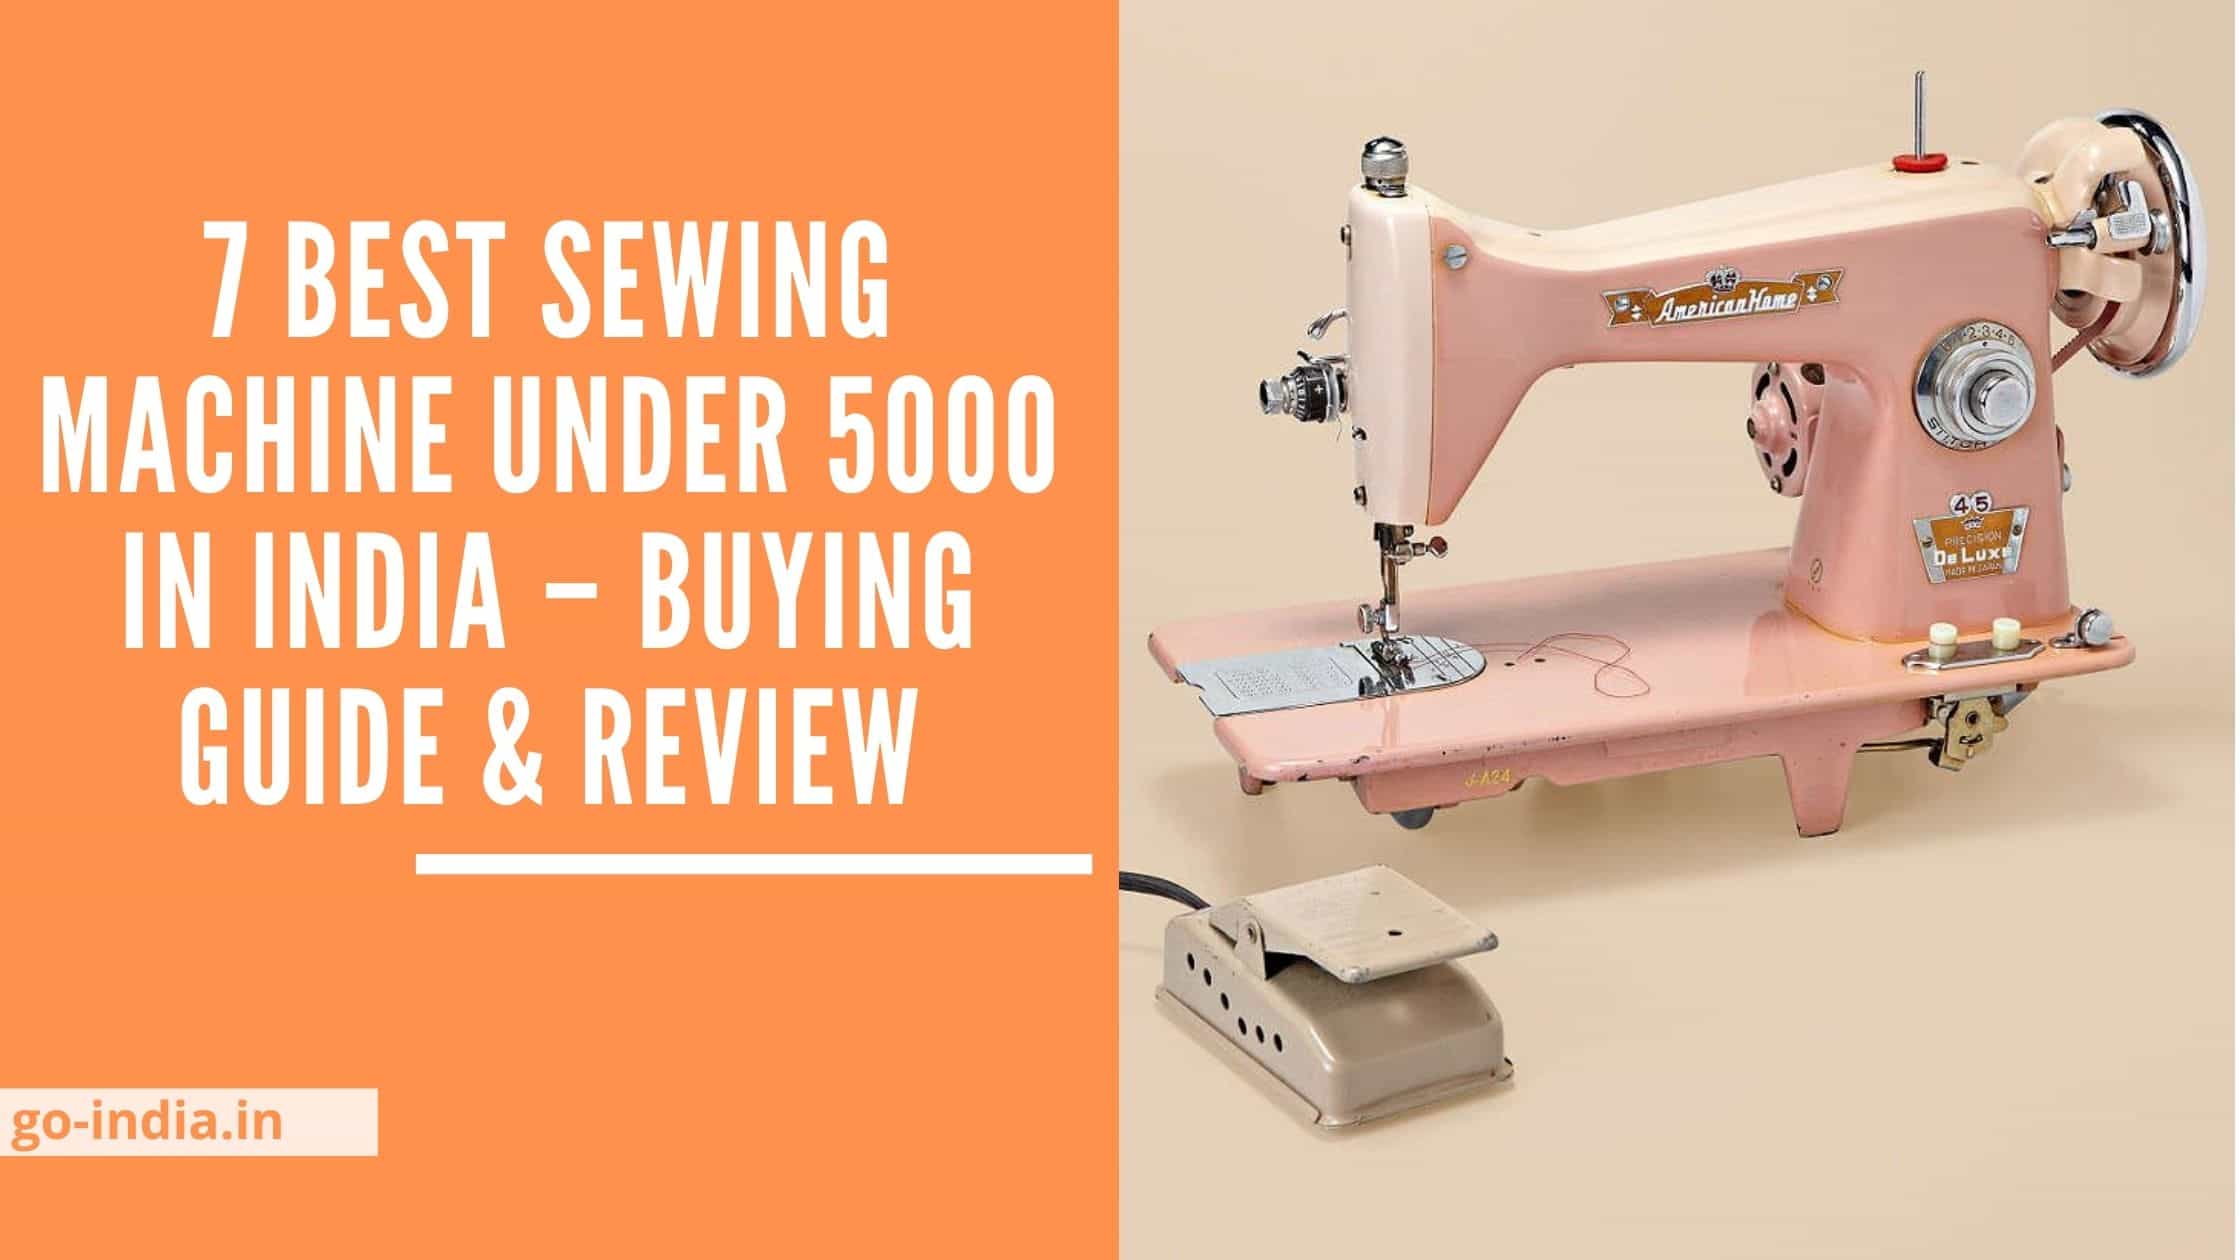 7 Best Sewing Machine Under 5000 in India – Buying Guide & Review